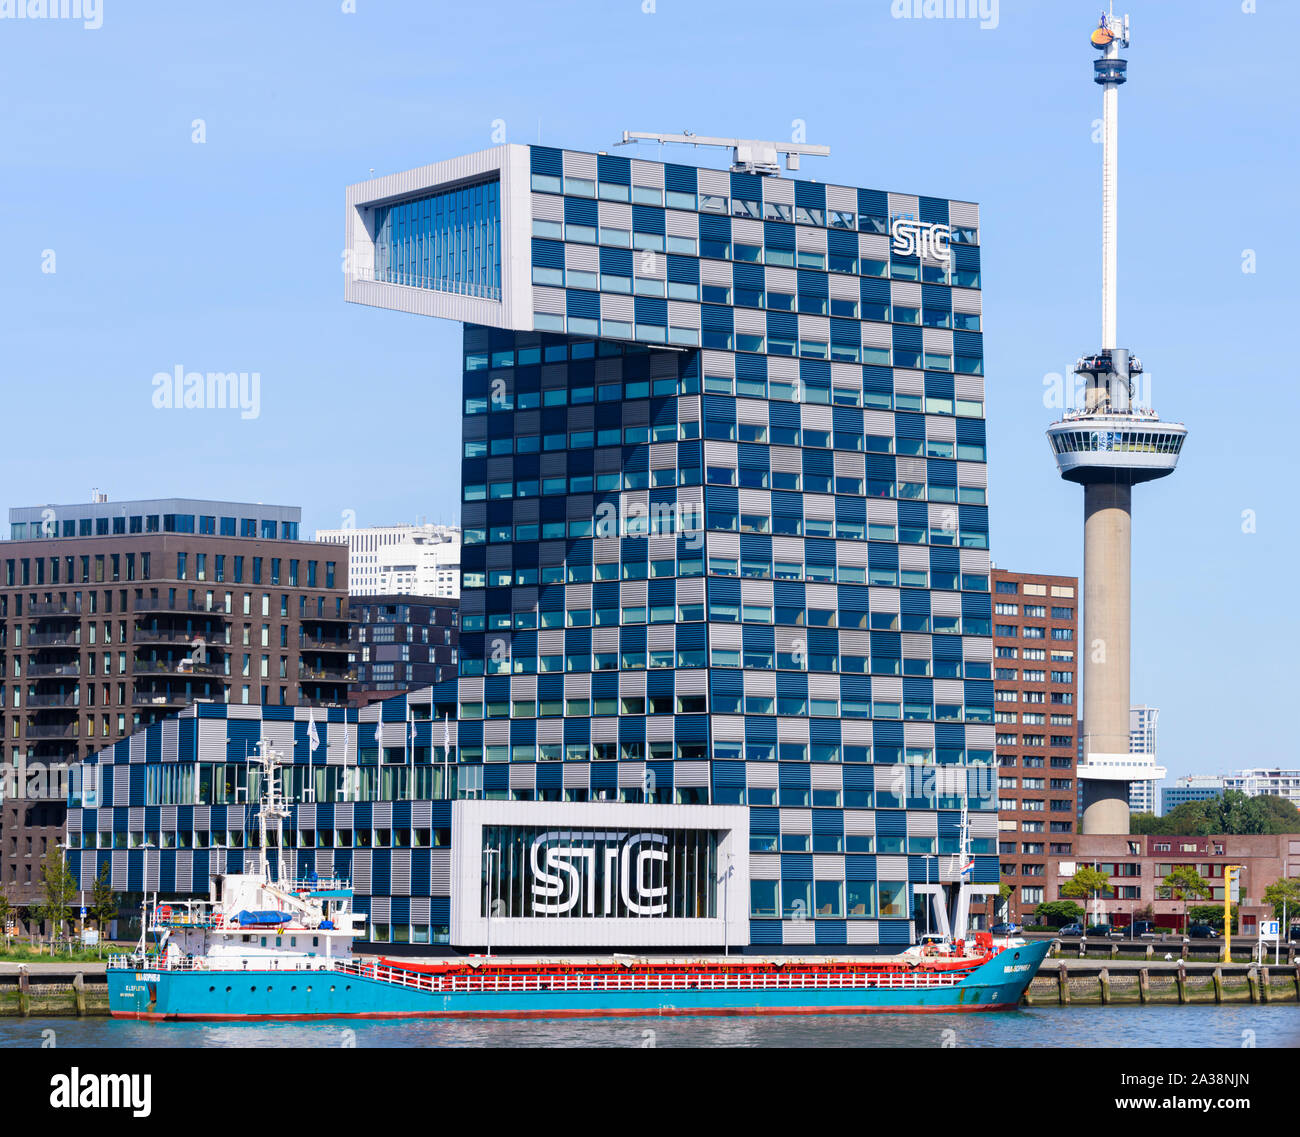 Modern office for the maritime training company STC with the iconic Euromast behind, Schiehaven, Rotterdam, Netherlands Stock Photo